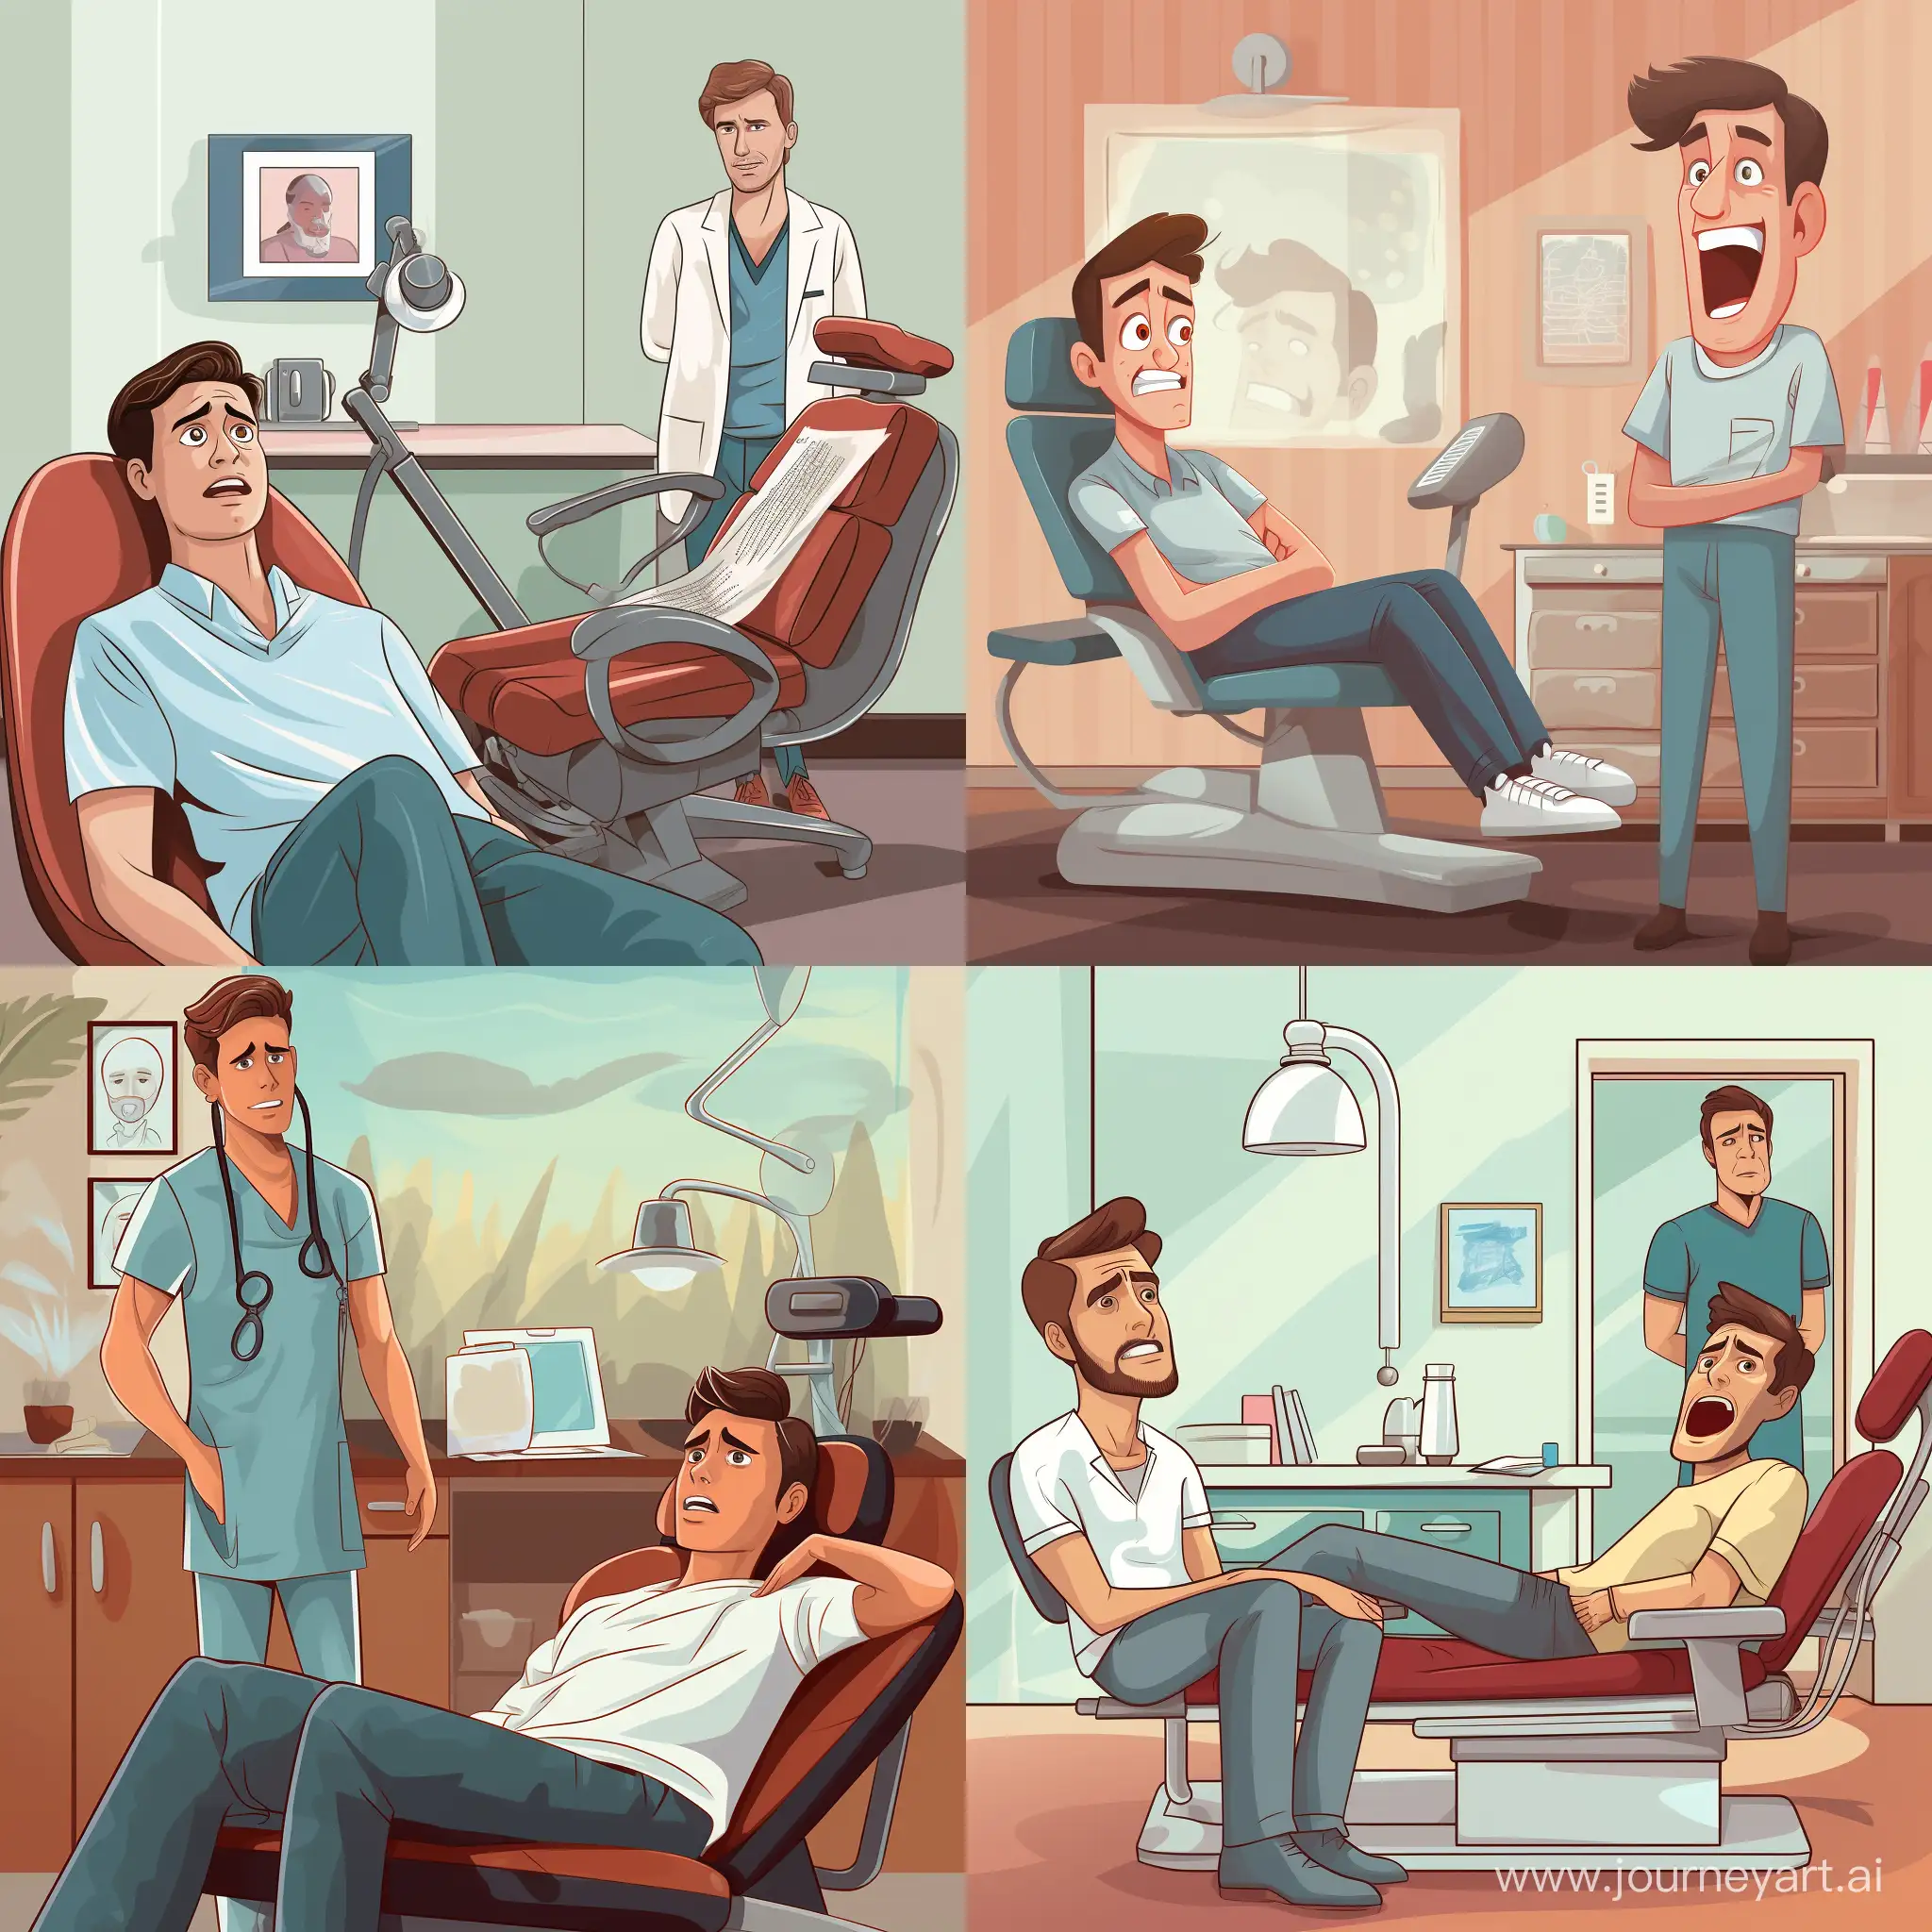 Illustration of a patient with a sad expression showing his fear of the dental chair, while a friendly dentist is waiting behind him with a smile to reassure him.